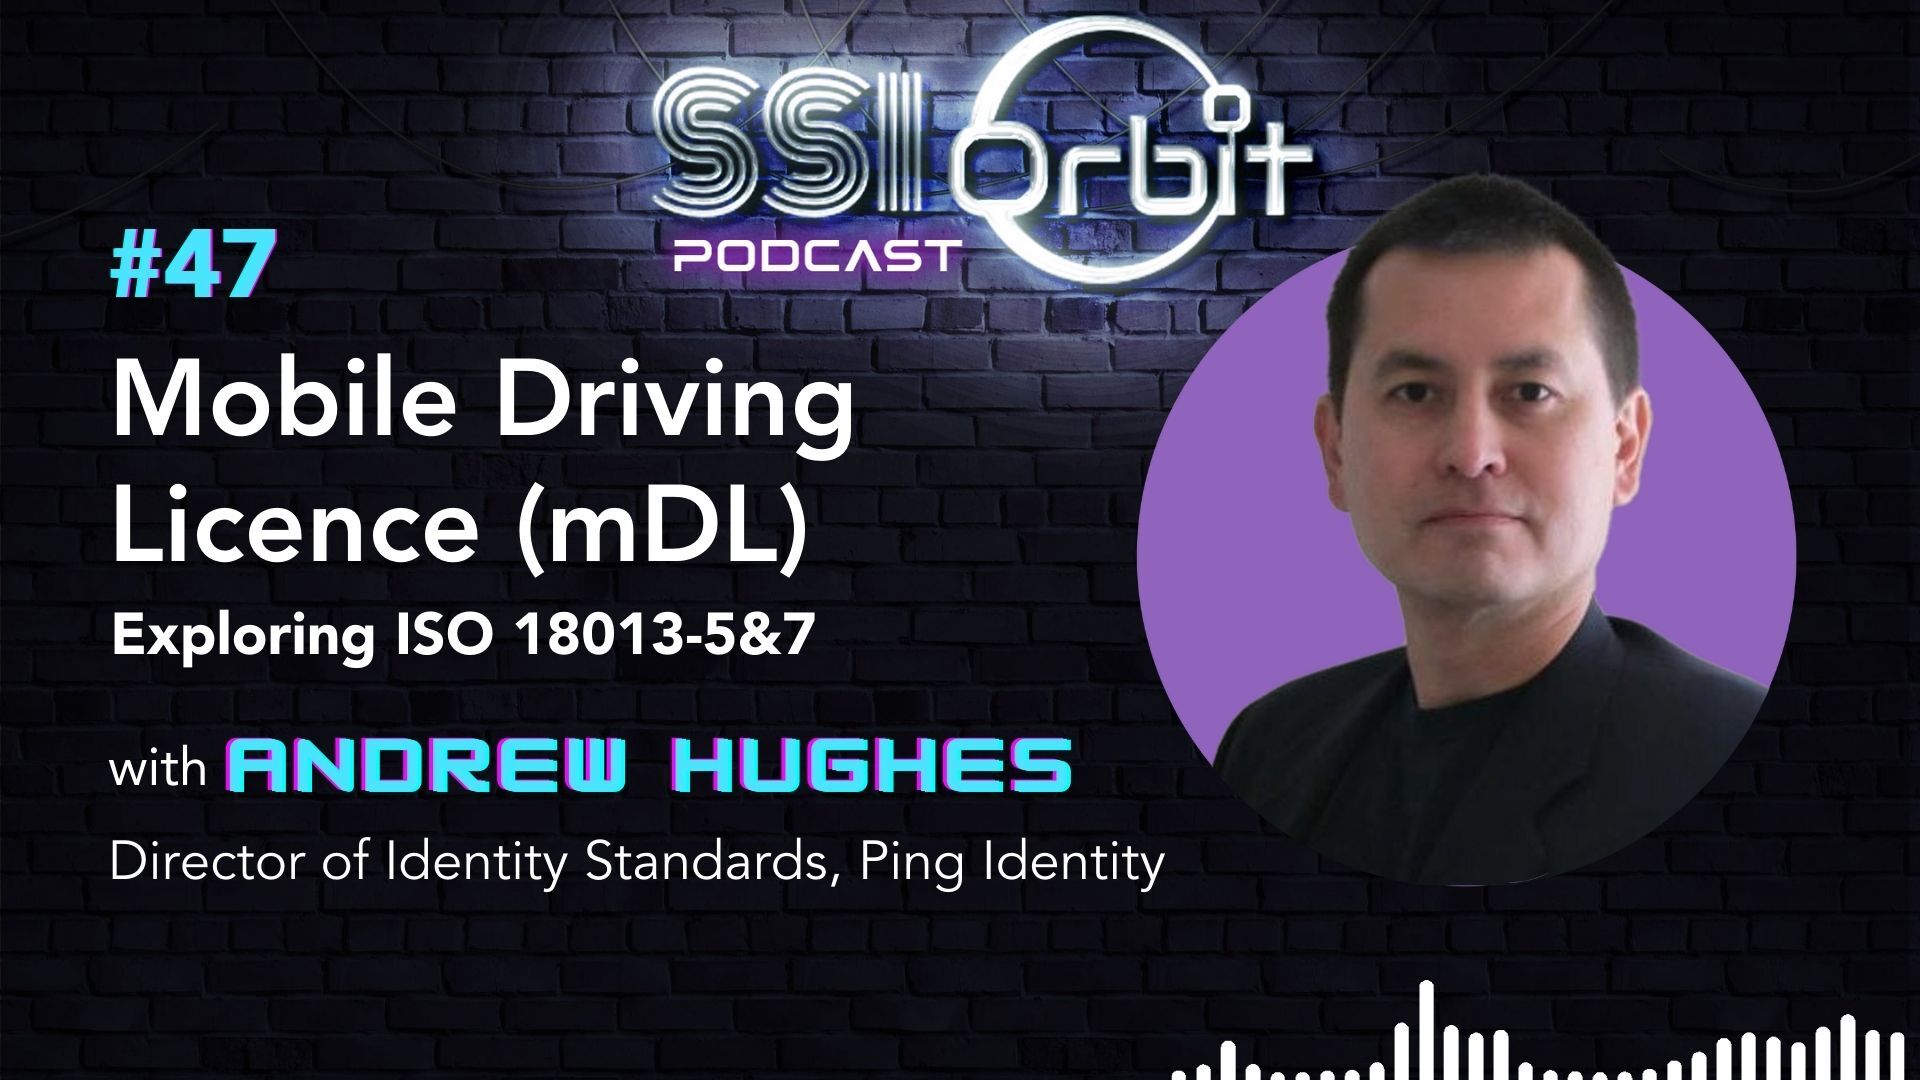 Mobile Driving Licence (mDL): Exploring ISO 18013-5&7 (with Andrew Hughes)